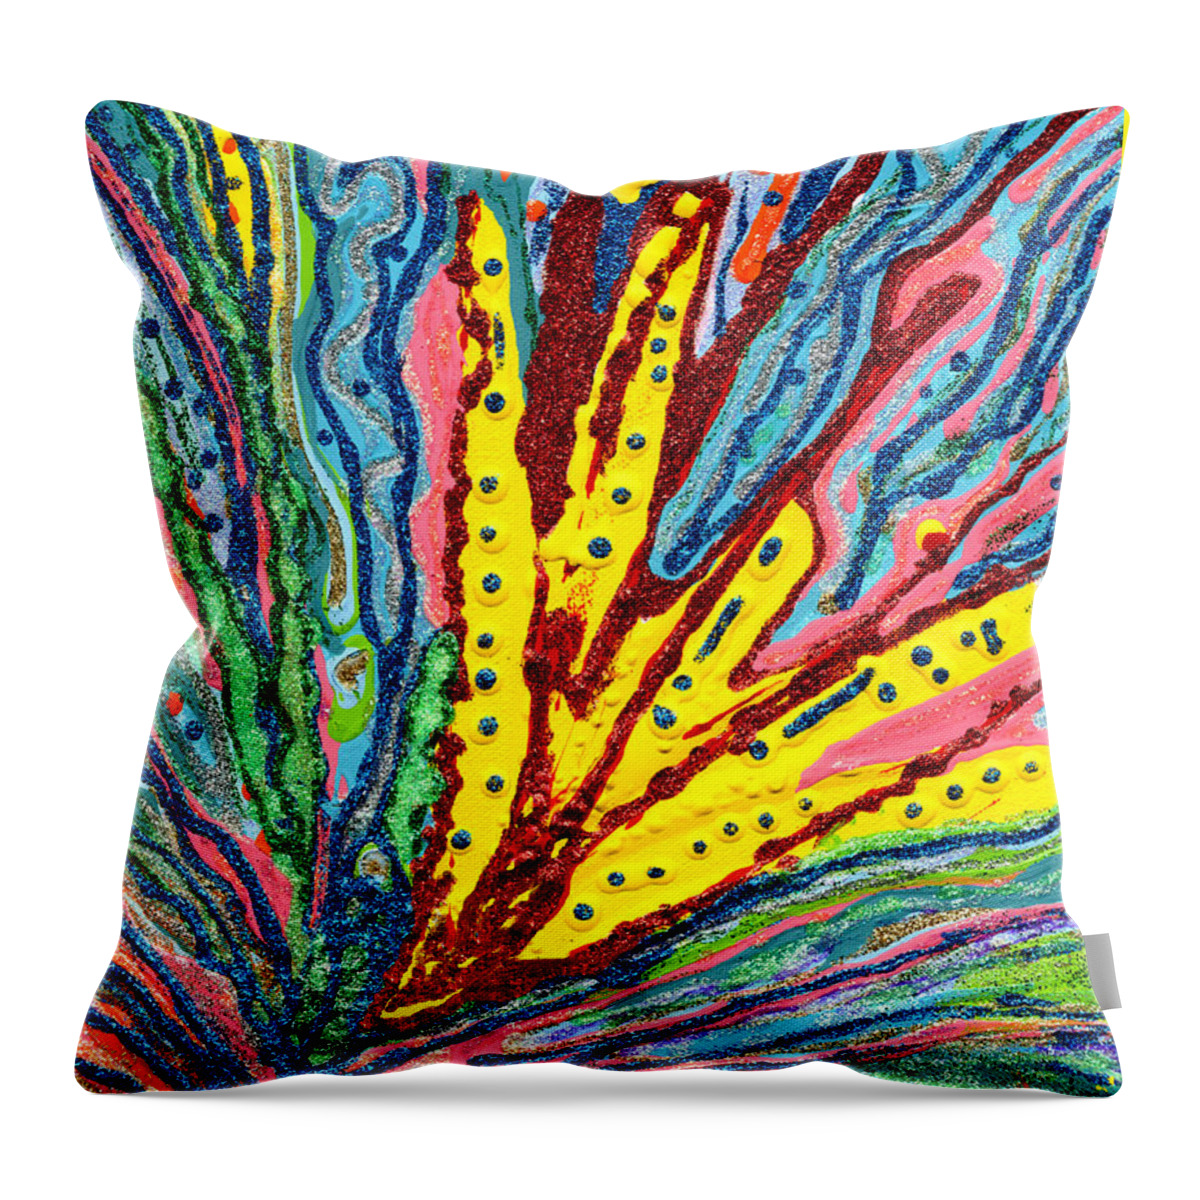 Floral Throw Pillow featuring the mixed media Water Lily by Strangefire Art    Scylla Liscombe